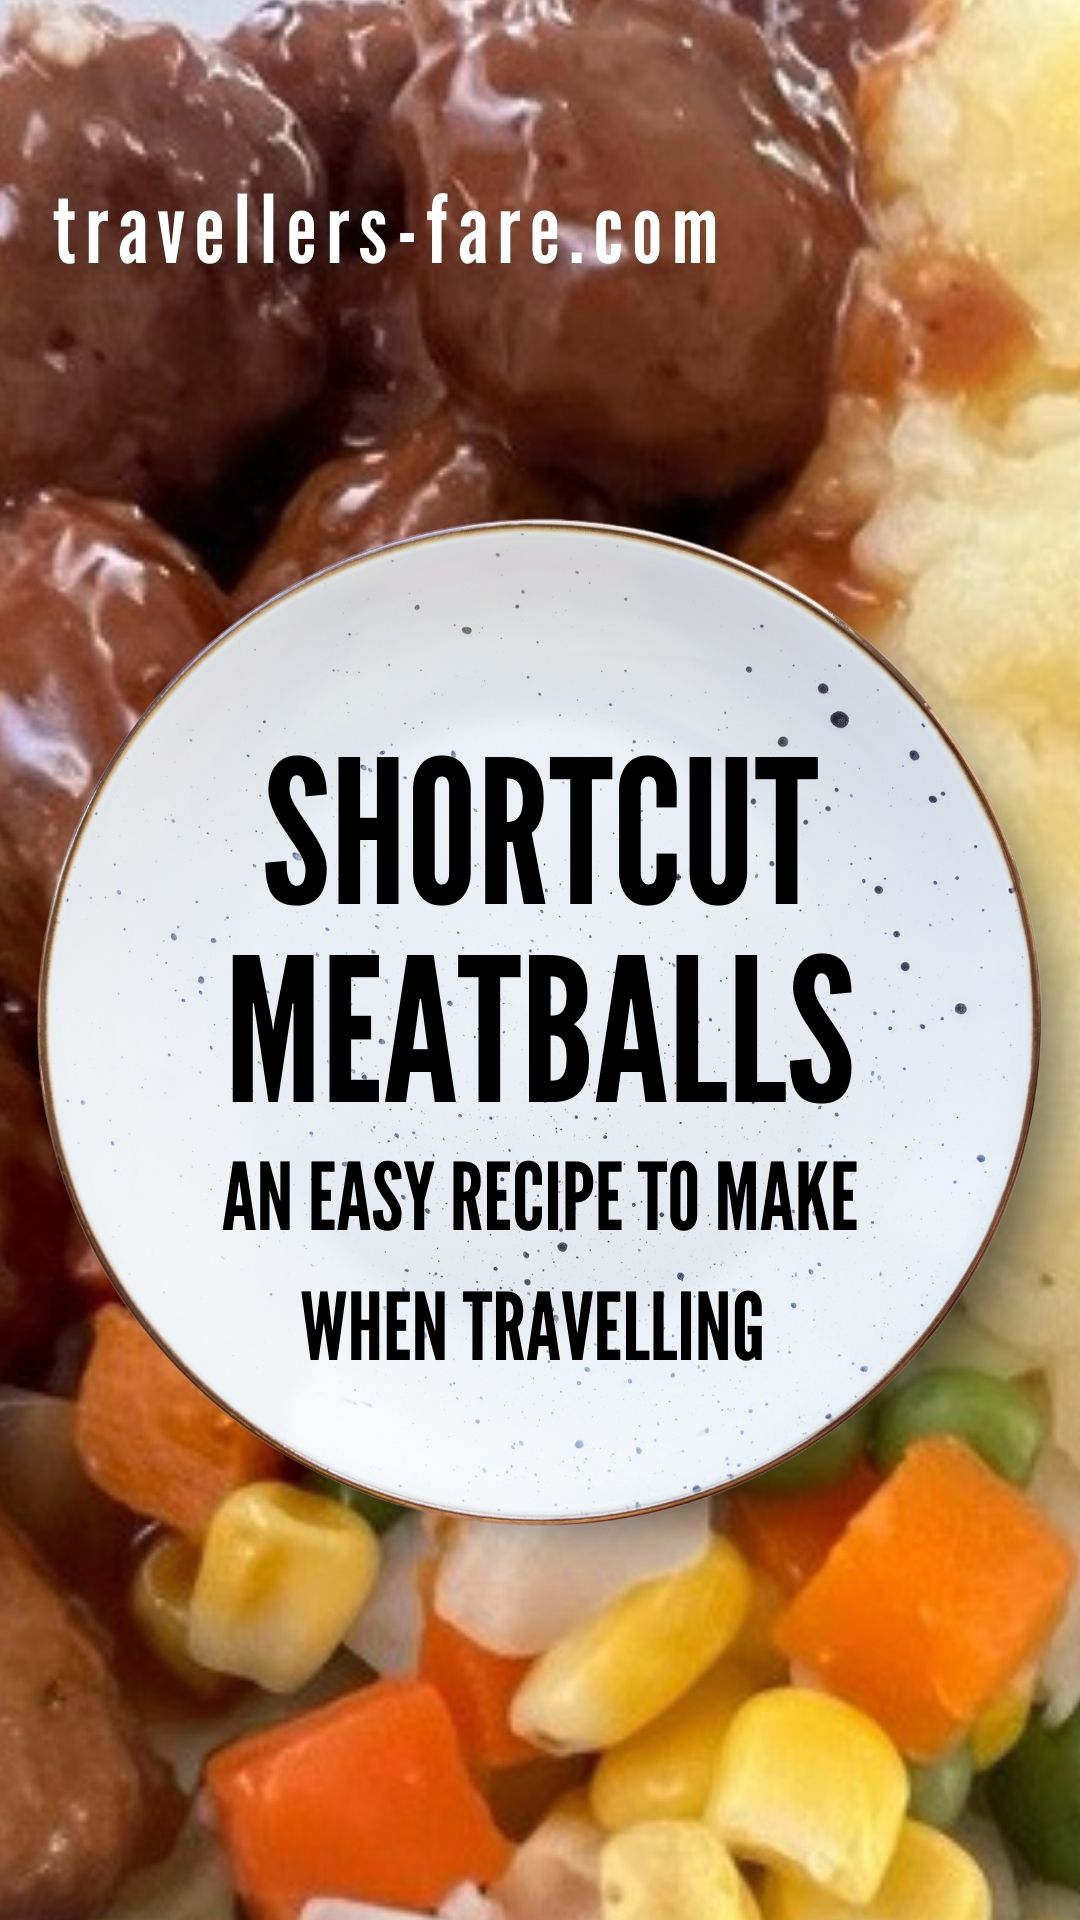 Shortcut Meatballs Are Made From Pre-made Meatballs From The Supermarket.